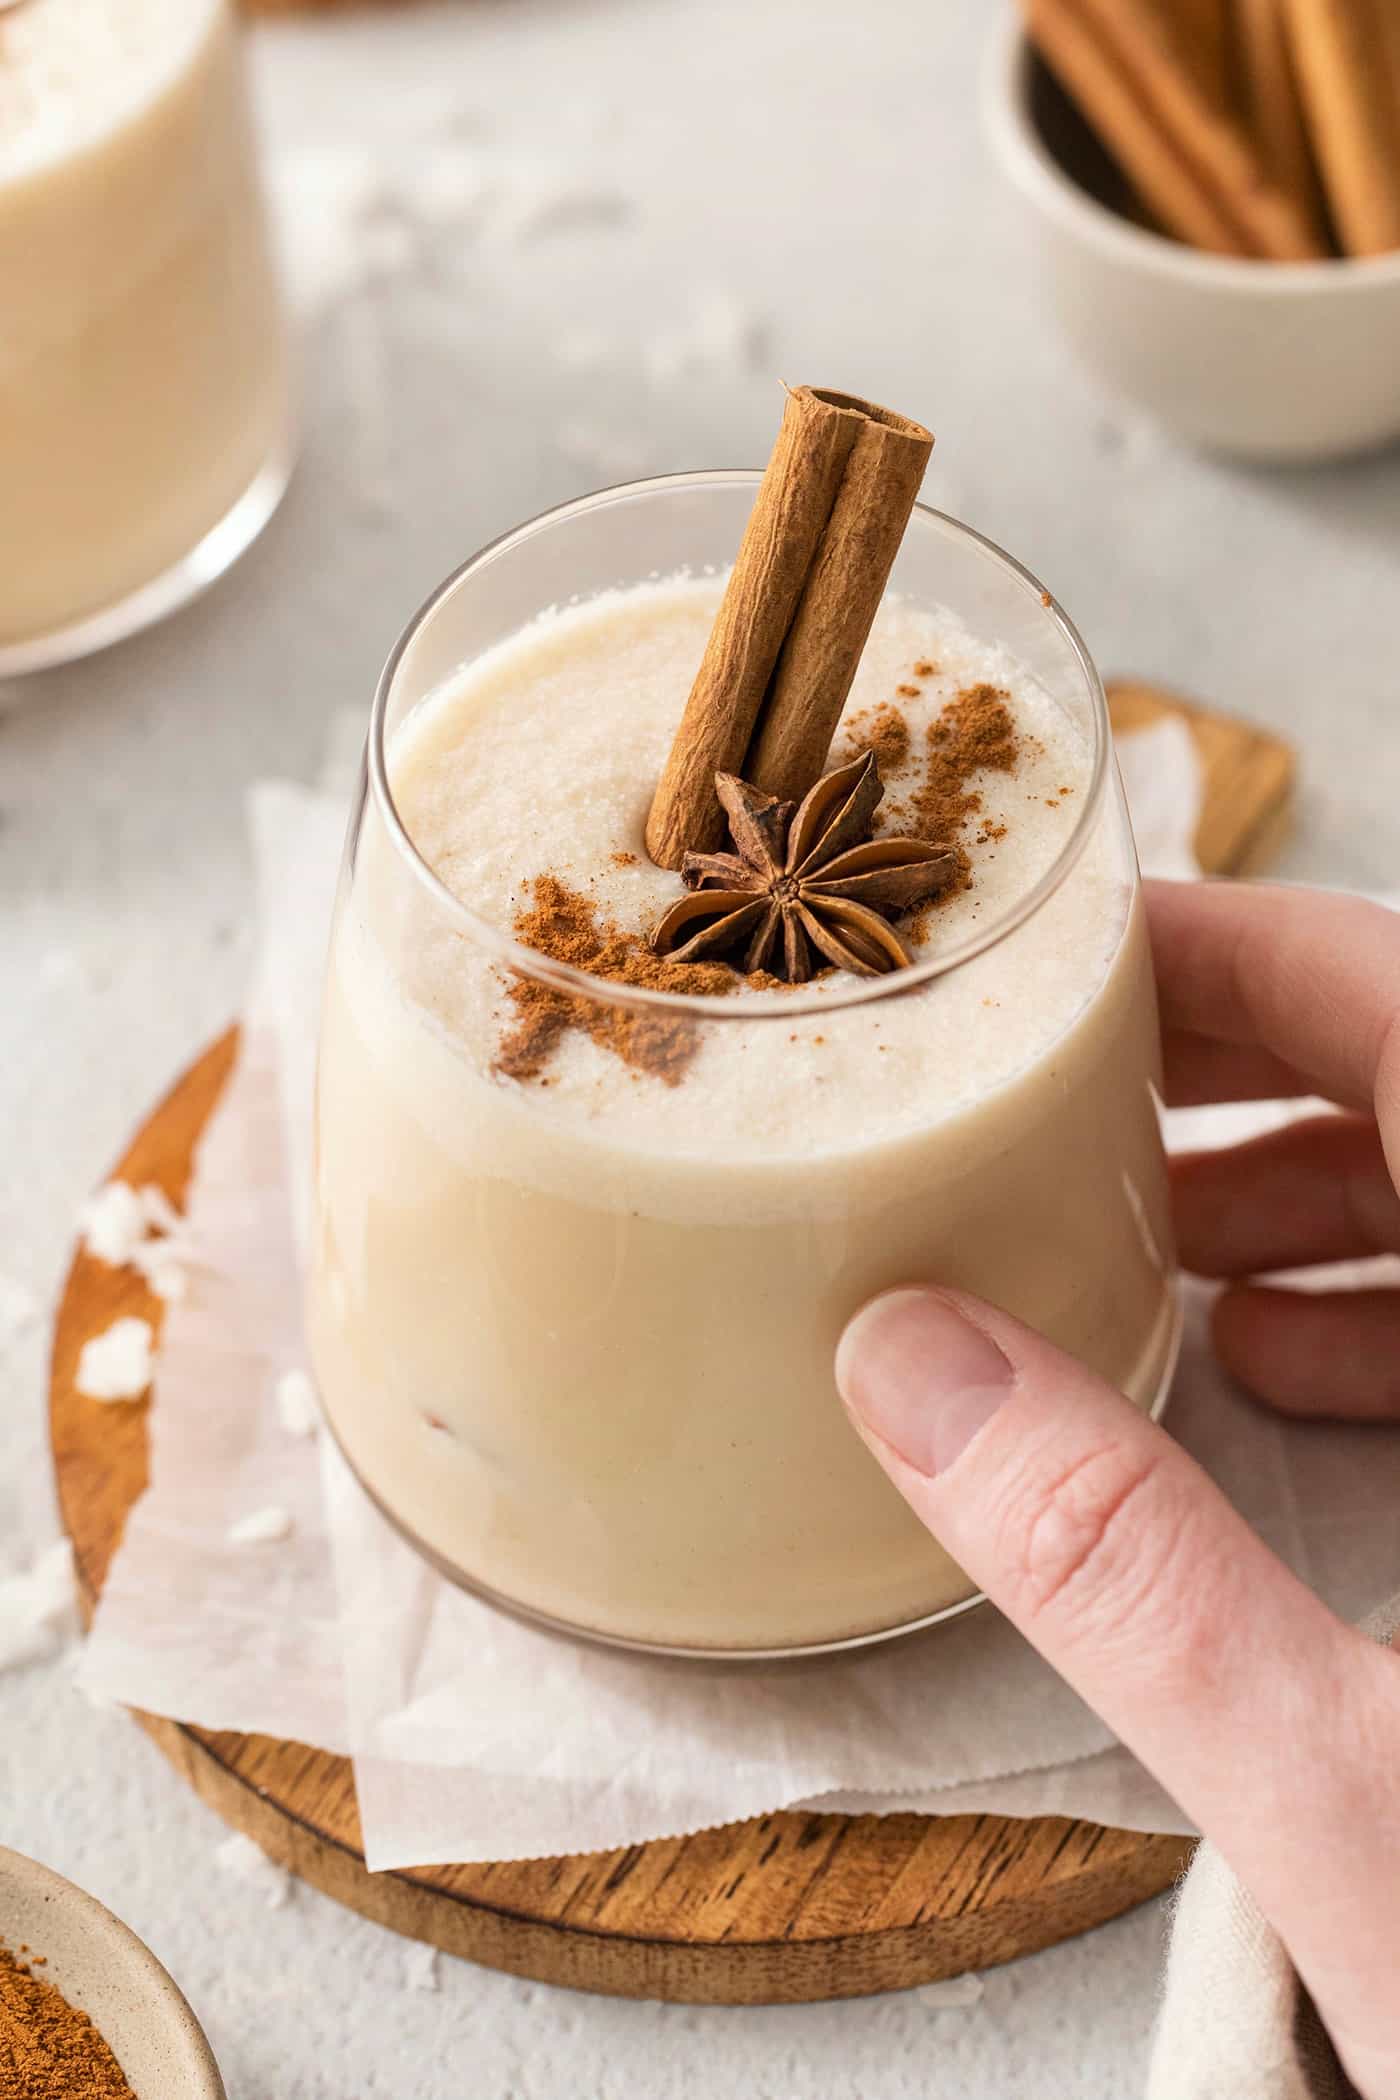 A hand touches a glass of coquito that's garnished with a cinnamon stick and with ground cinnamon scattered across the frothy top. More drinks are seen in the background.